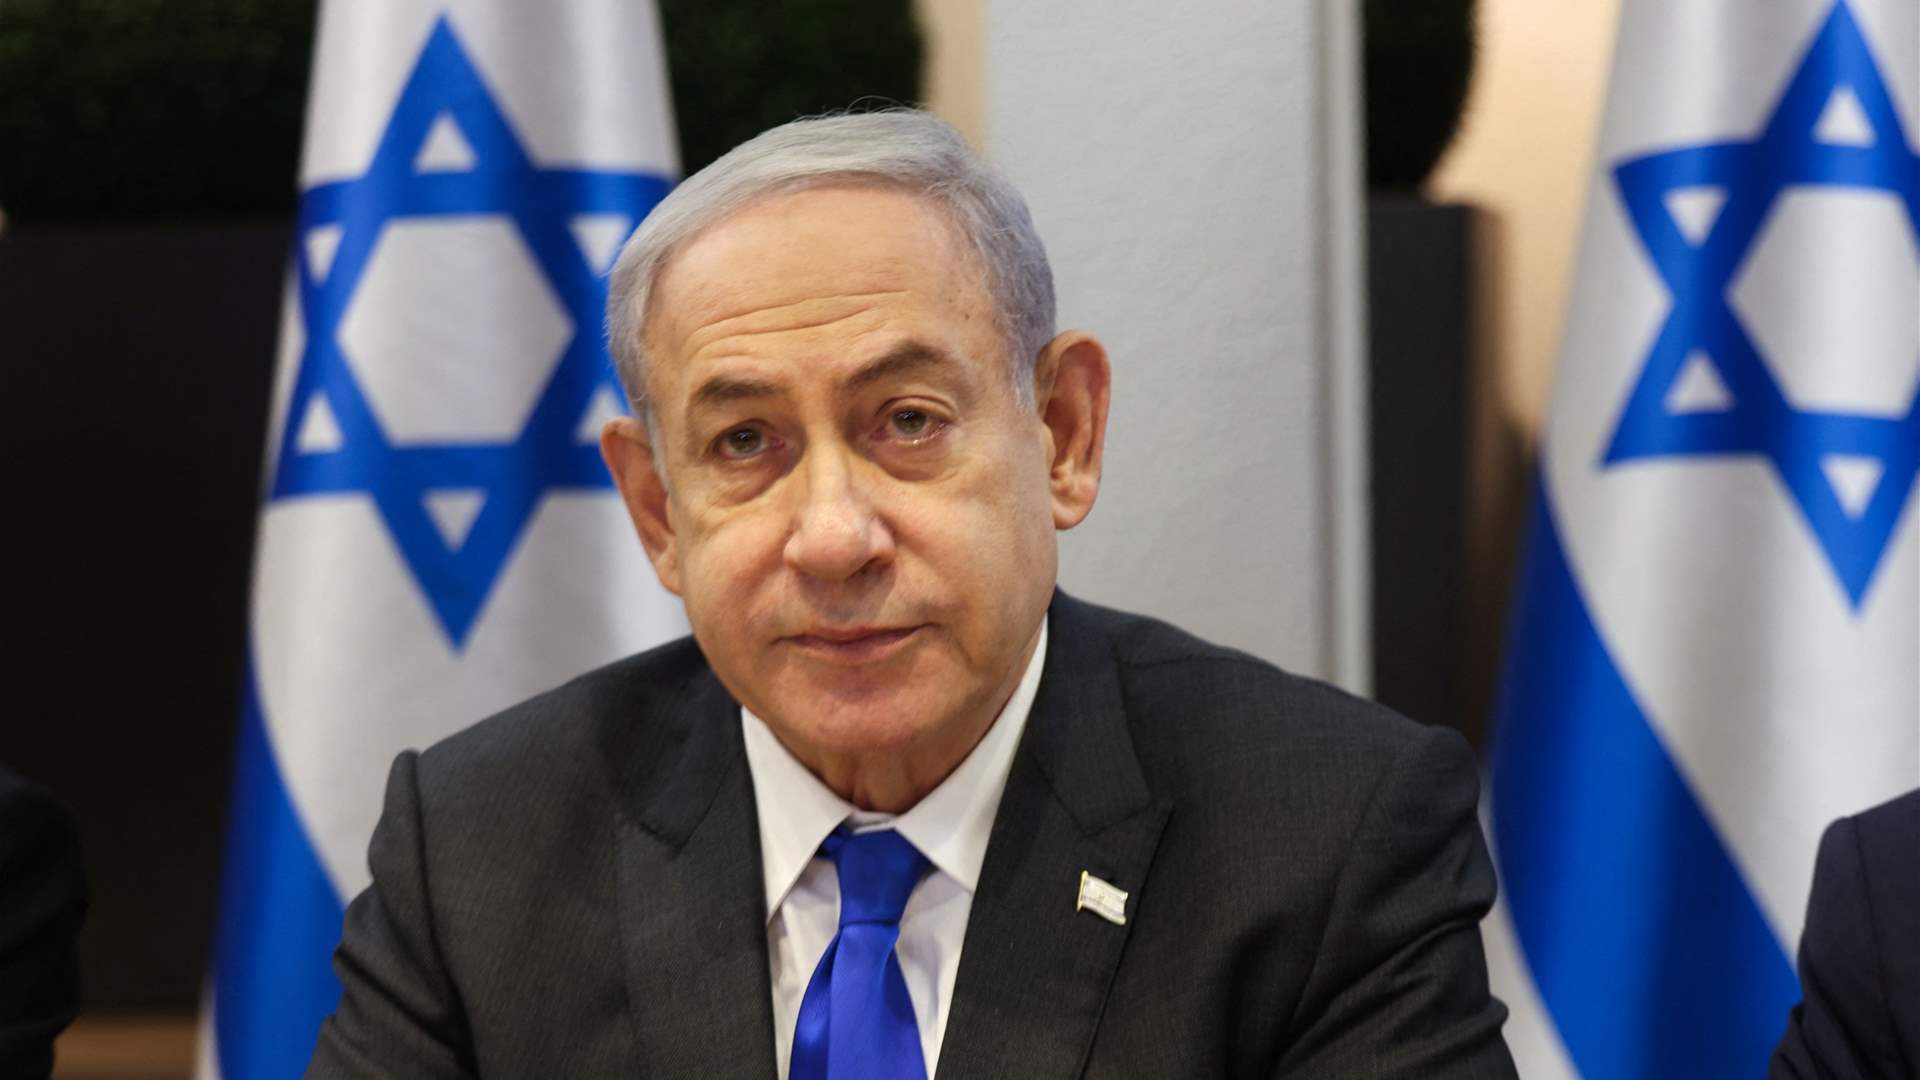 Netanyahu says military decisions are based on Israeli calculations 